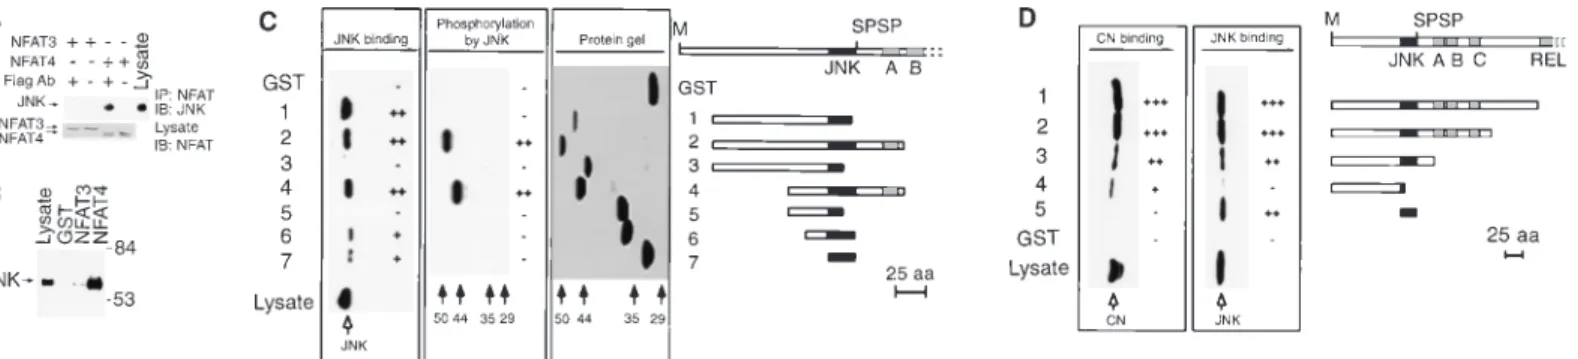 Fig. 1. Interaction of NFAT4 with the JNK protein kinase. (A) NFAT4 and JNK interact in vivo